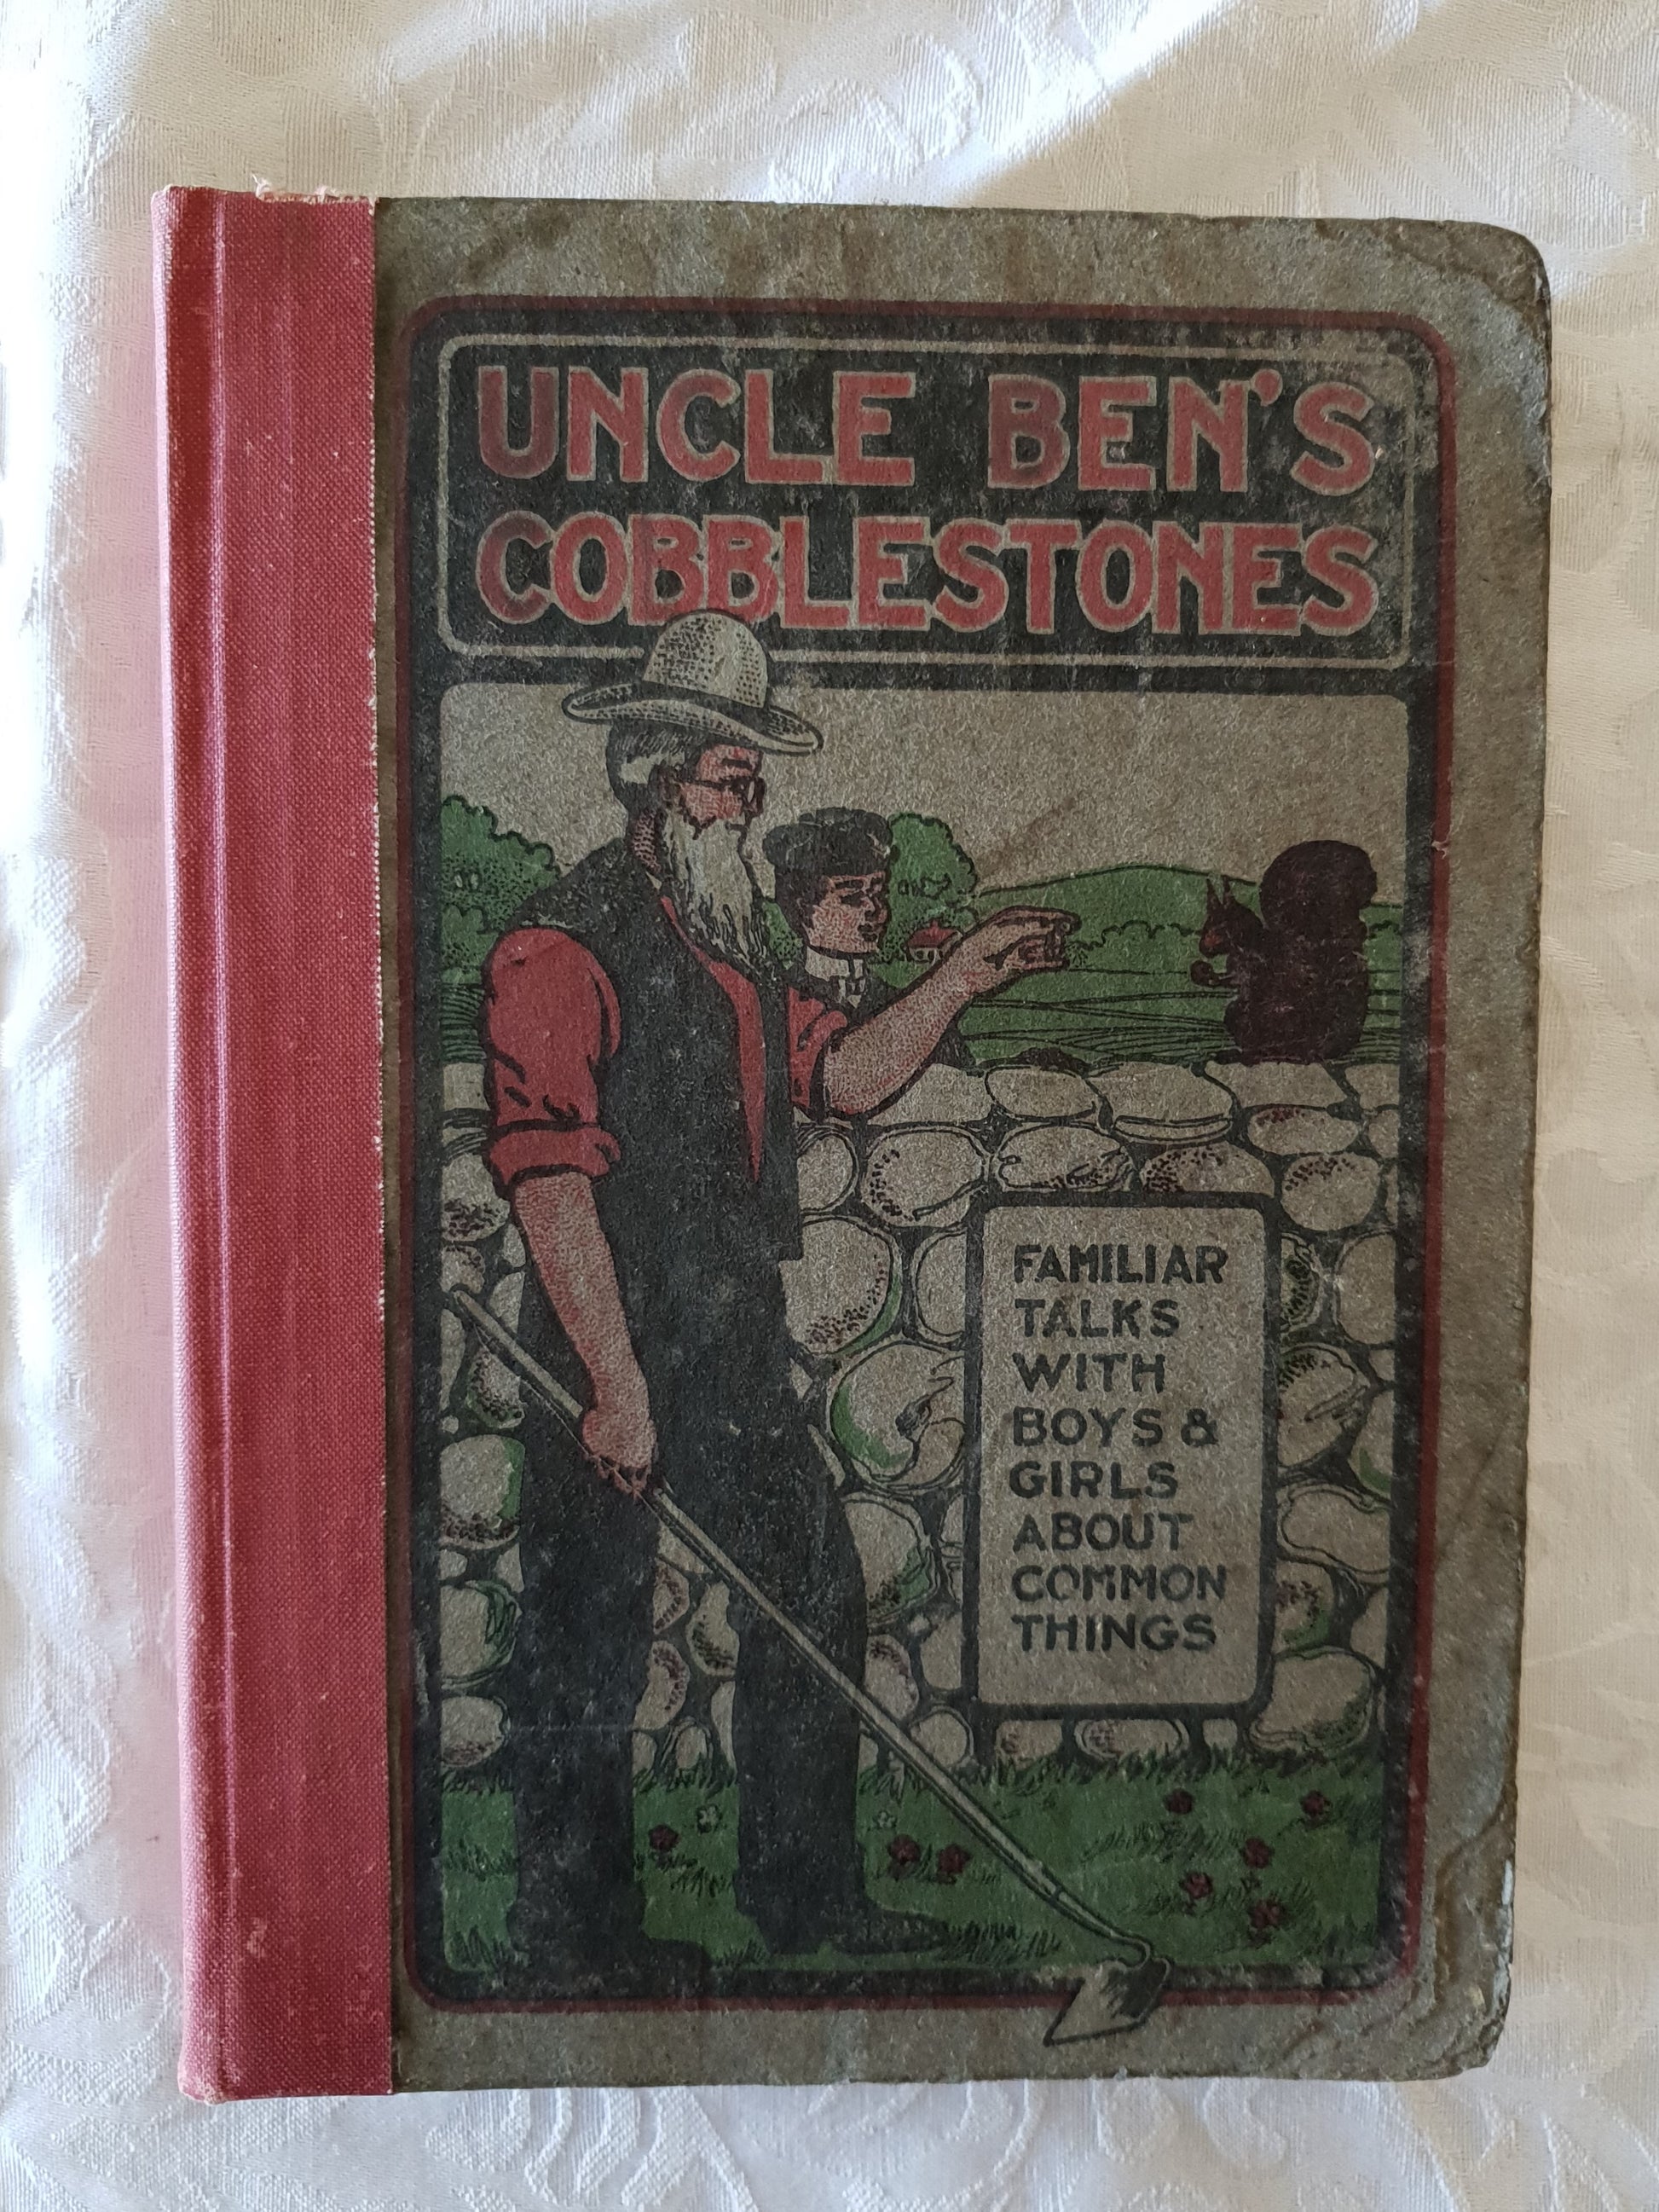 Uncle Ben's Cobblestones  Familiar Talks About Common Things  by W. H. B. Miller, illustrated by P. J. Lemos